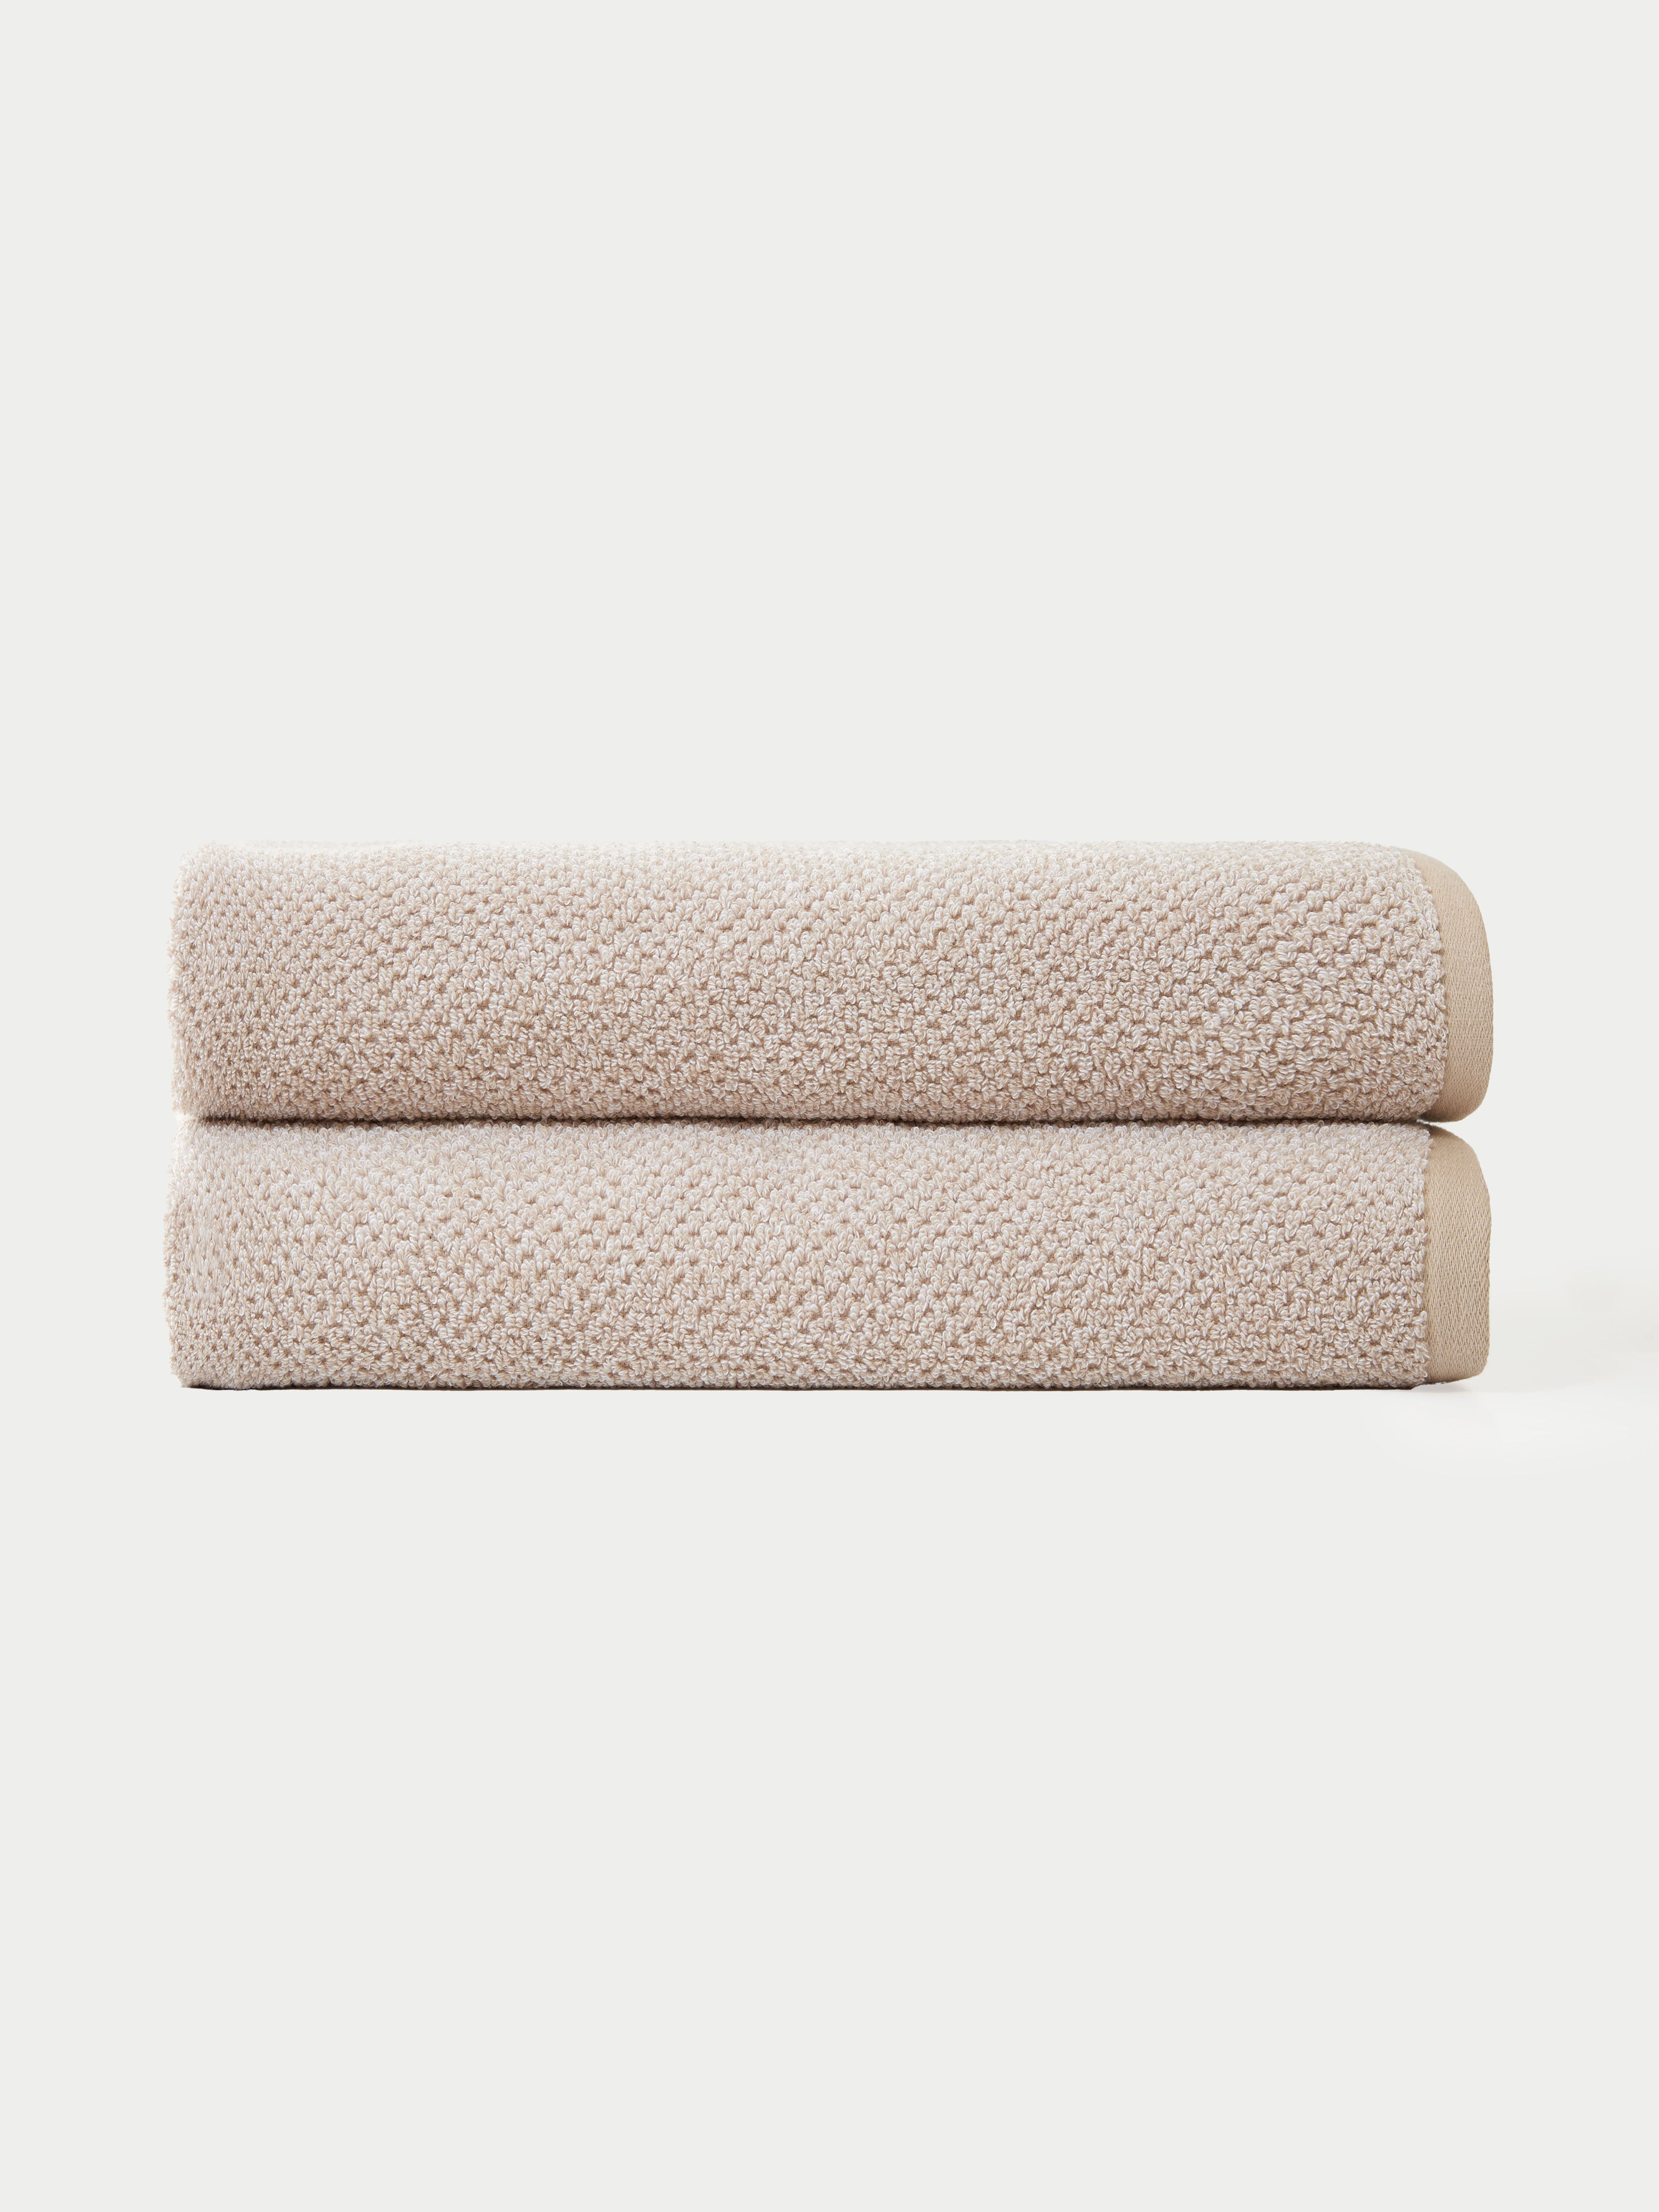 Nantucket Bath Towels in the color Heathered Sand. Photo of Nantucket Bath Towels taken with the bath towels on a white background. |Color: Heathered Sand